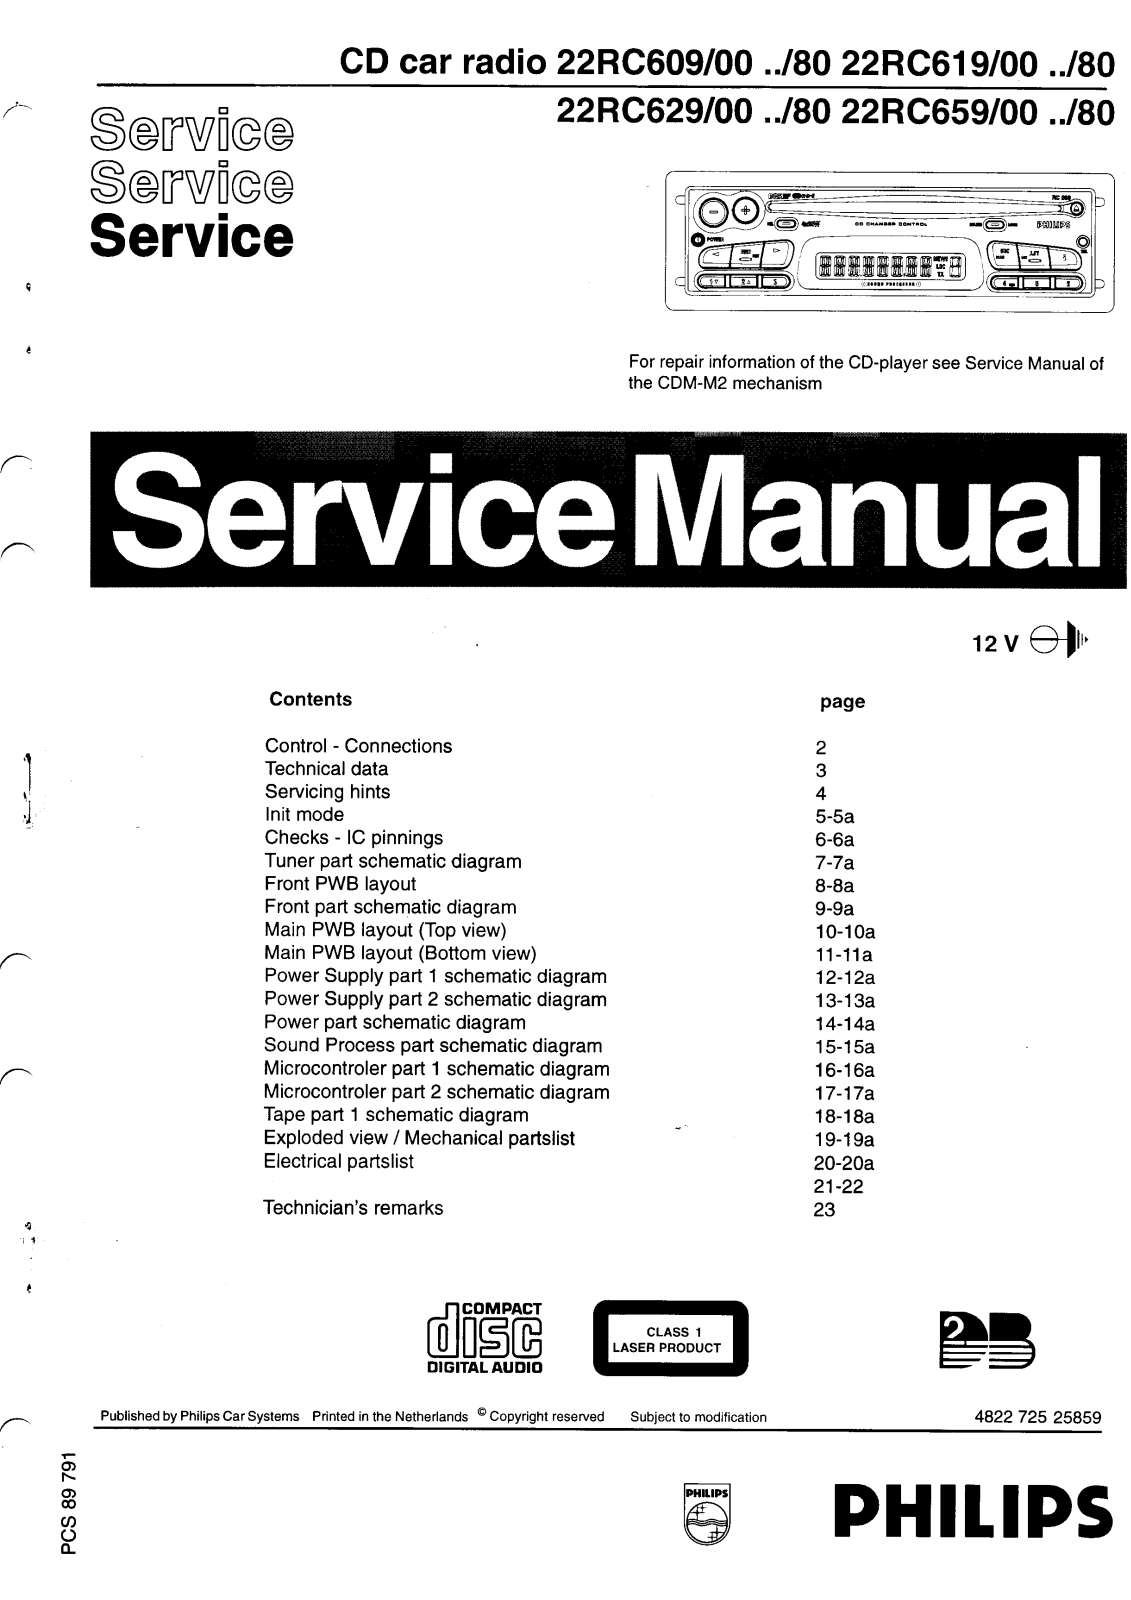 Philips 22-RC-659, 22-RC-629, 22-RC-619, 22-RC-609 Service Manual